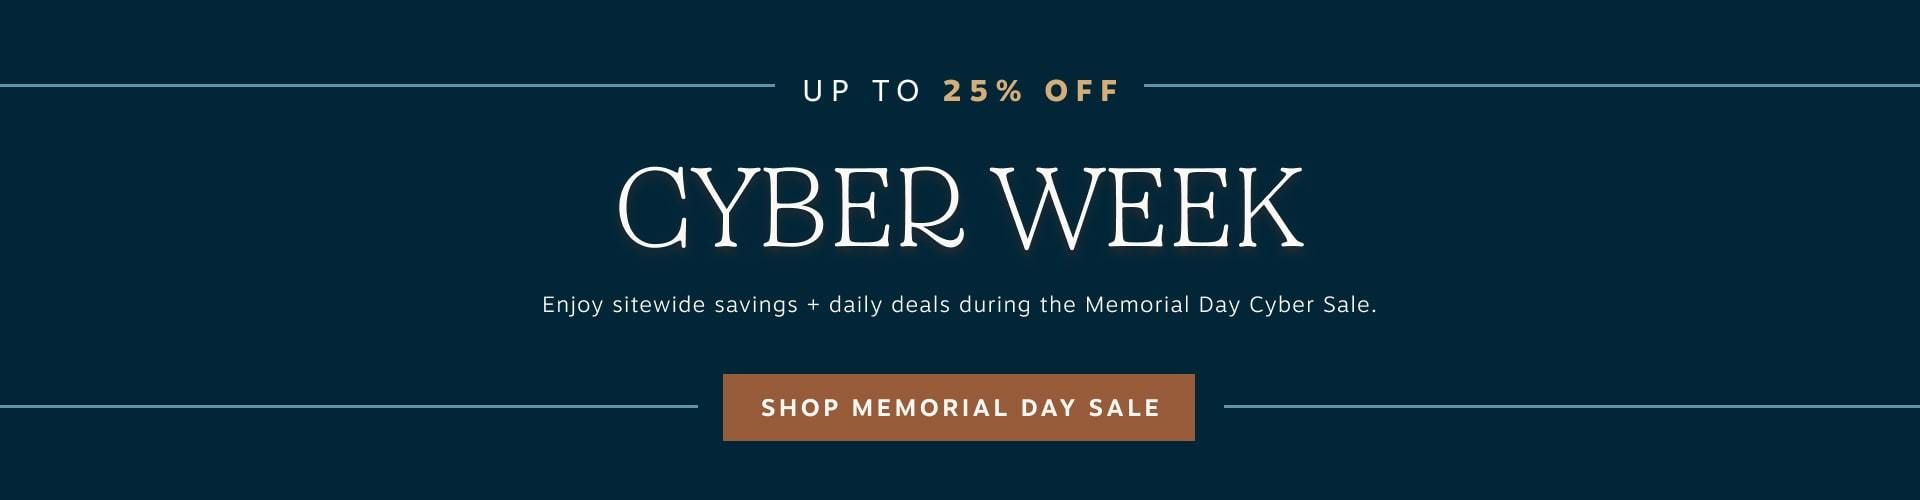 Up to 25% Off | Cyber Week | Enjoy sitewide savings + daily deals during the Memorial Day Cyber Sale. | Shop Memorial Day Sale